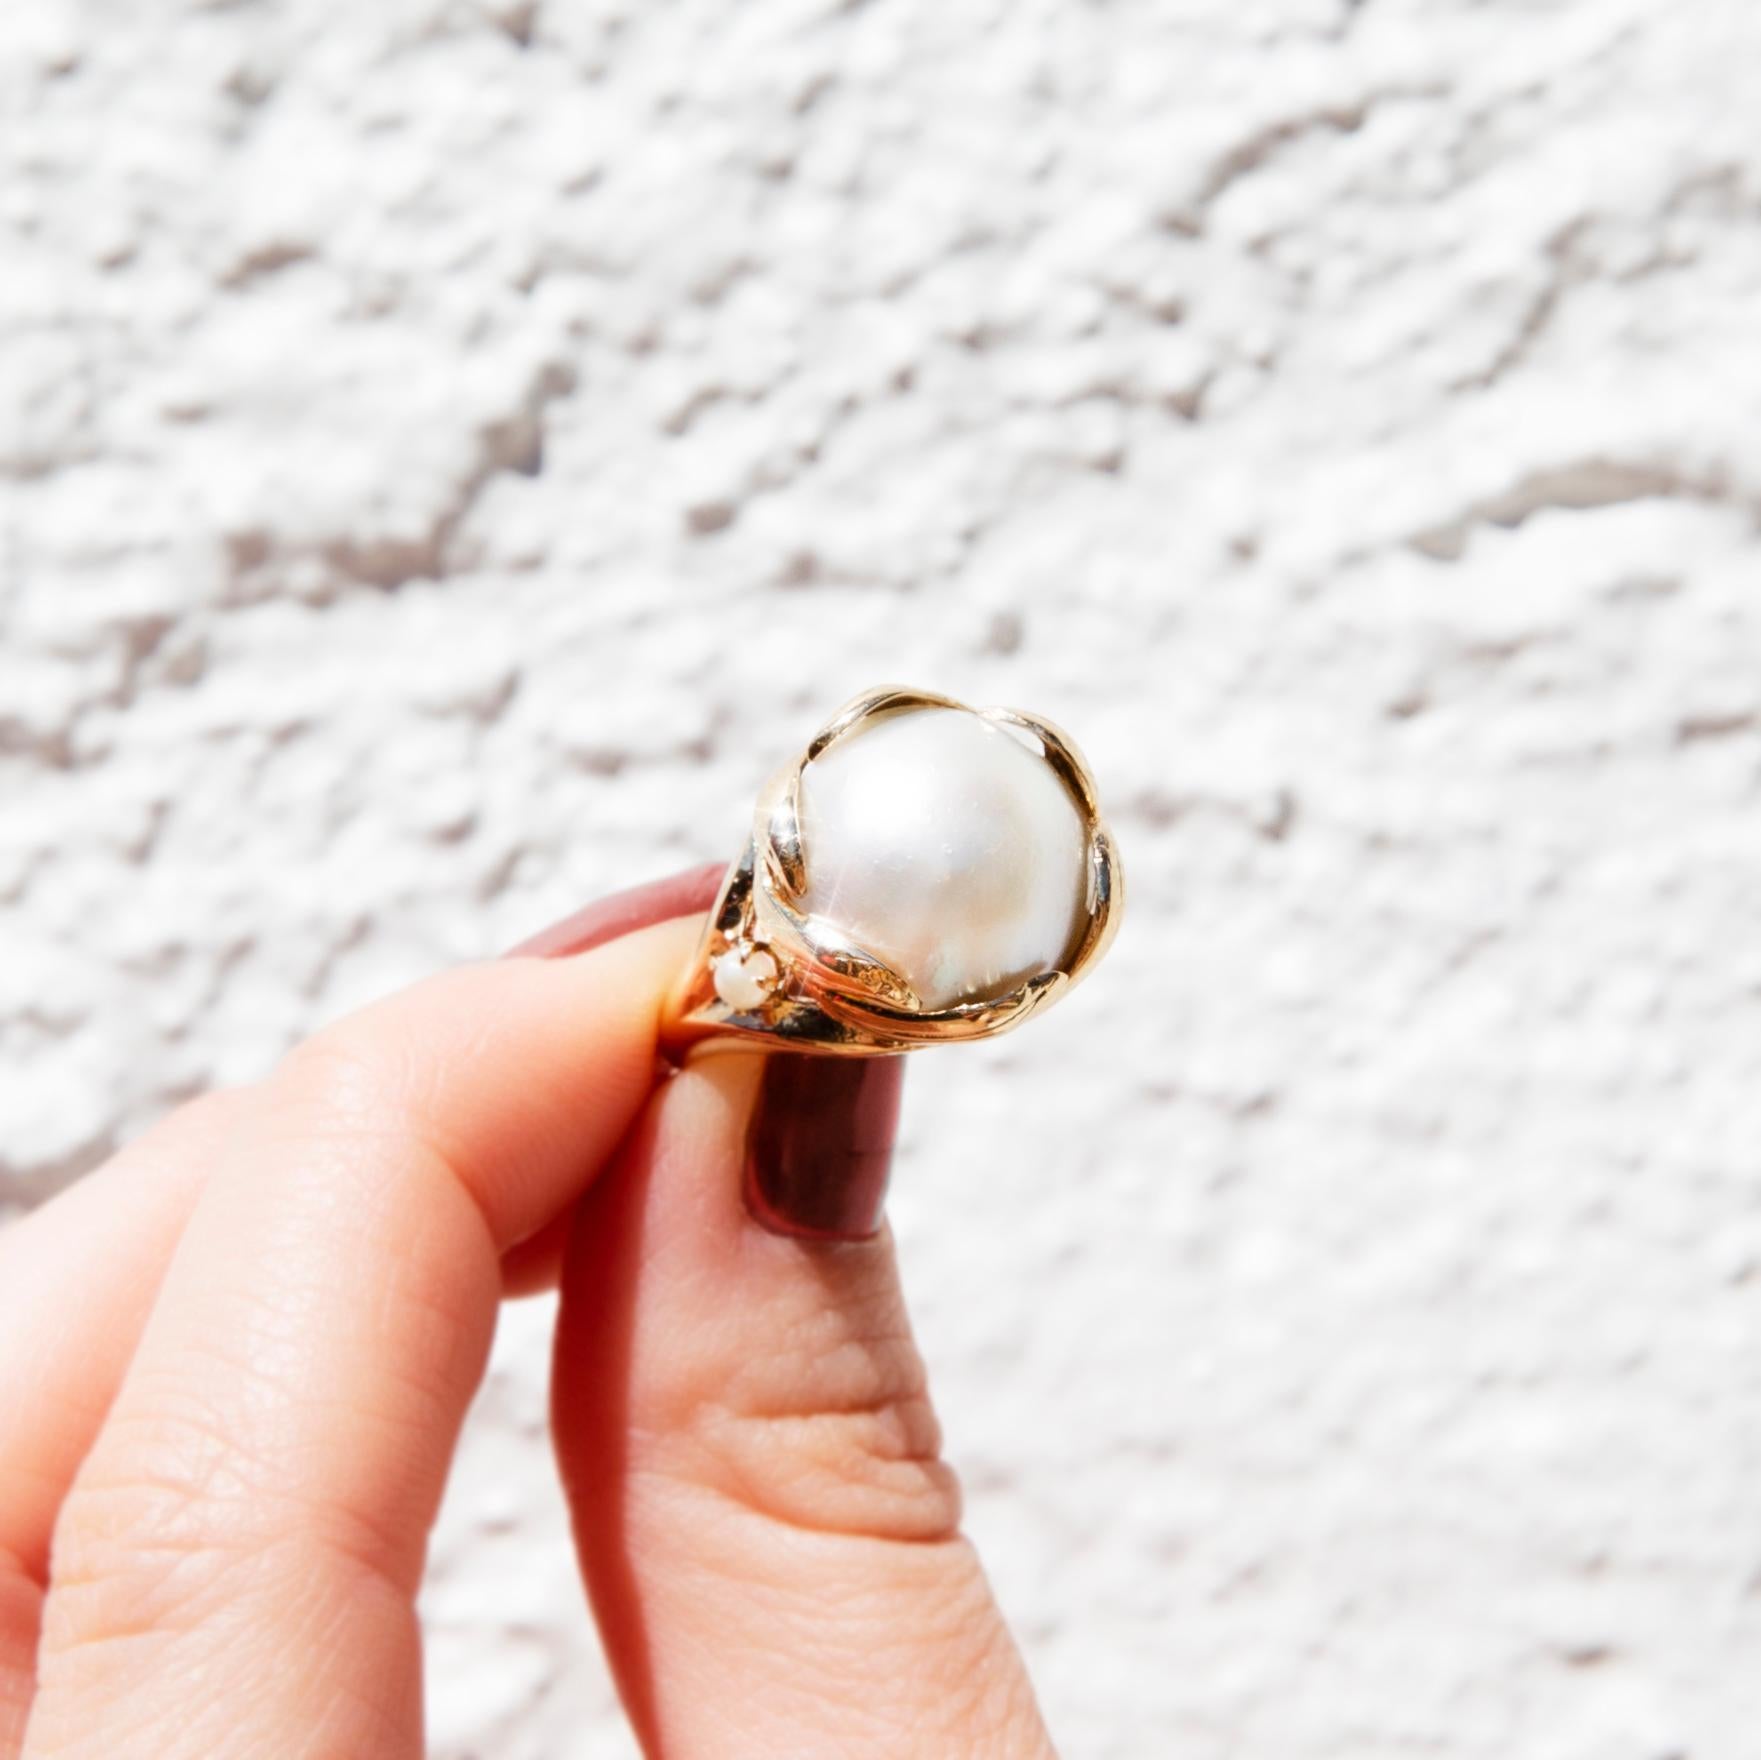 Crafted in 14 carat yellow gold, this darling vintage ring, circa 1980s, features a lustrous mabe pearl on a graceful basket setting, holding two shoulder-set small pearls, that wraps the pearl in elegant leaf-style fixtures. We have named her The